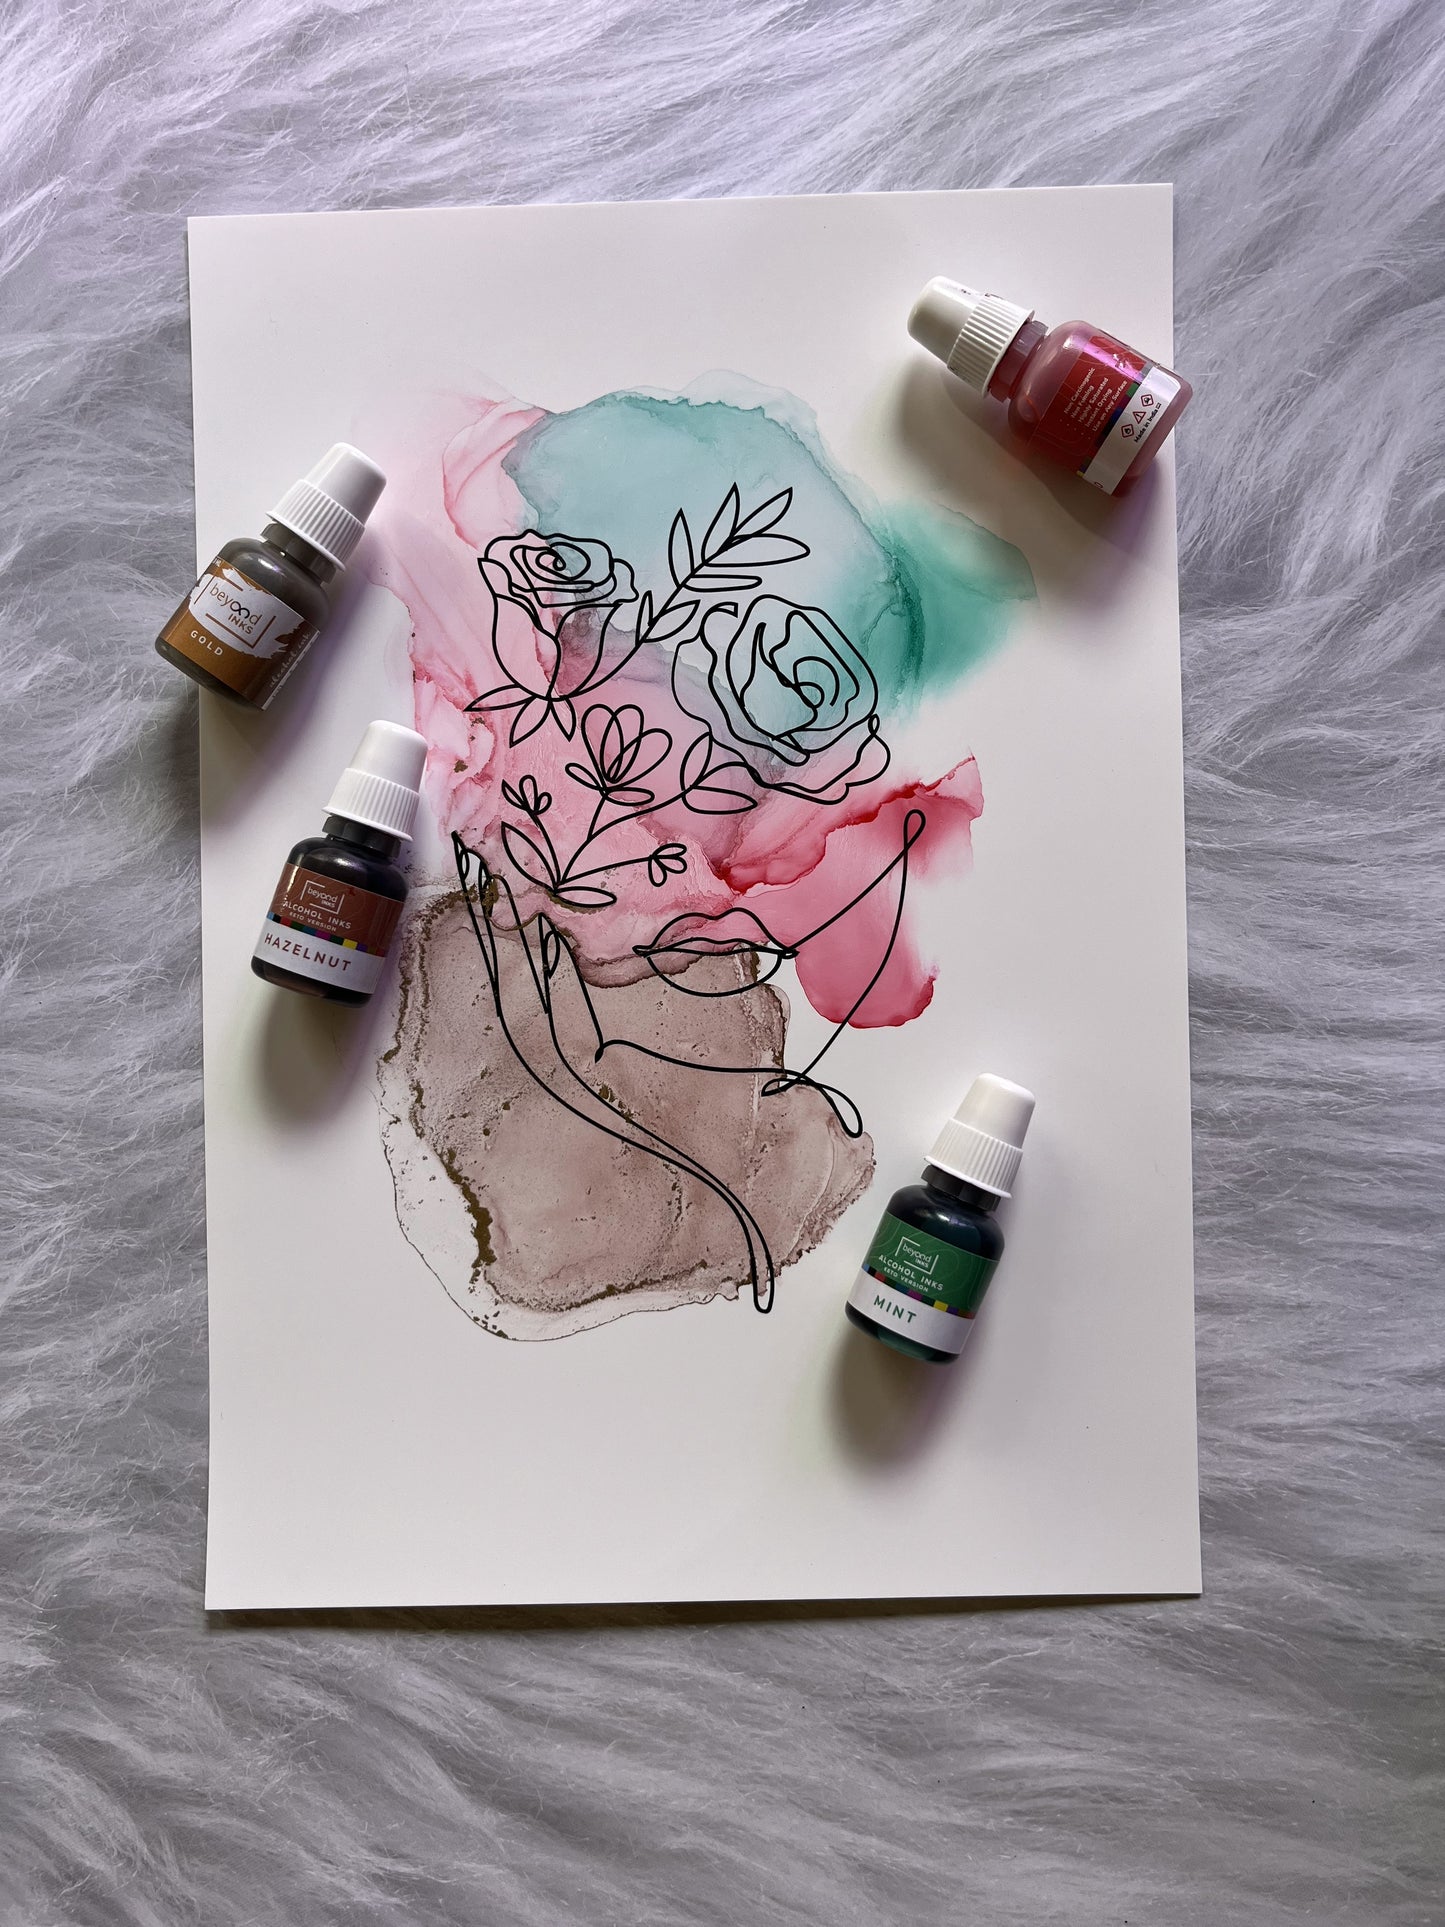 Alcohol Ink Coloring Kit - "FACES"